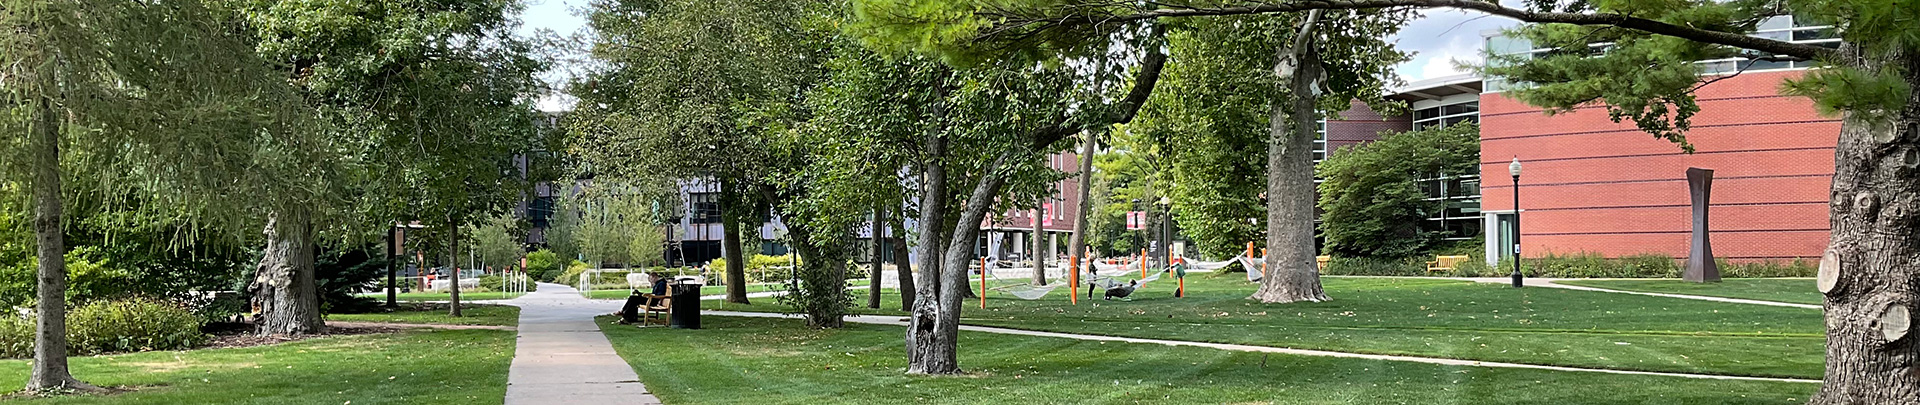 Central Campus of Grinnell College overlooking the Noyce Science Center and the HSSC.